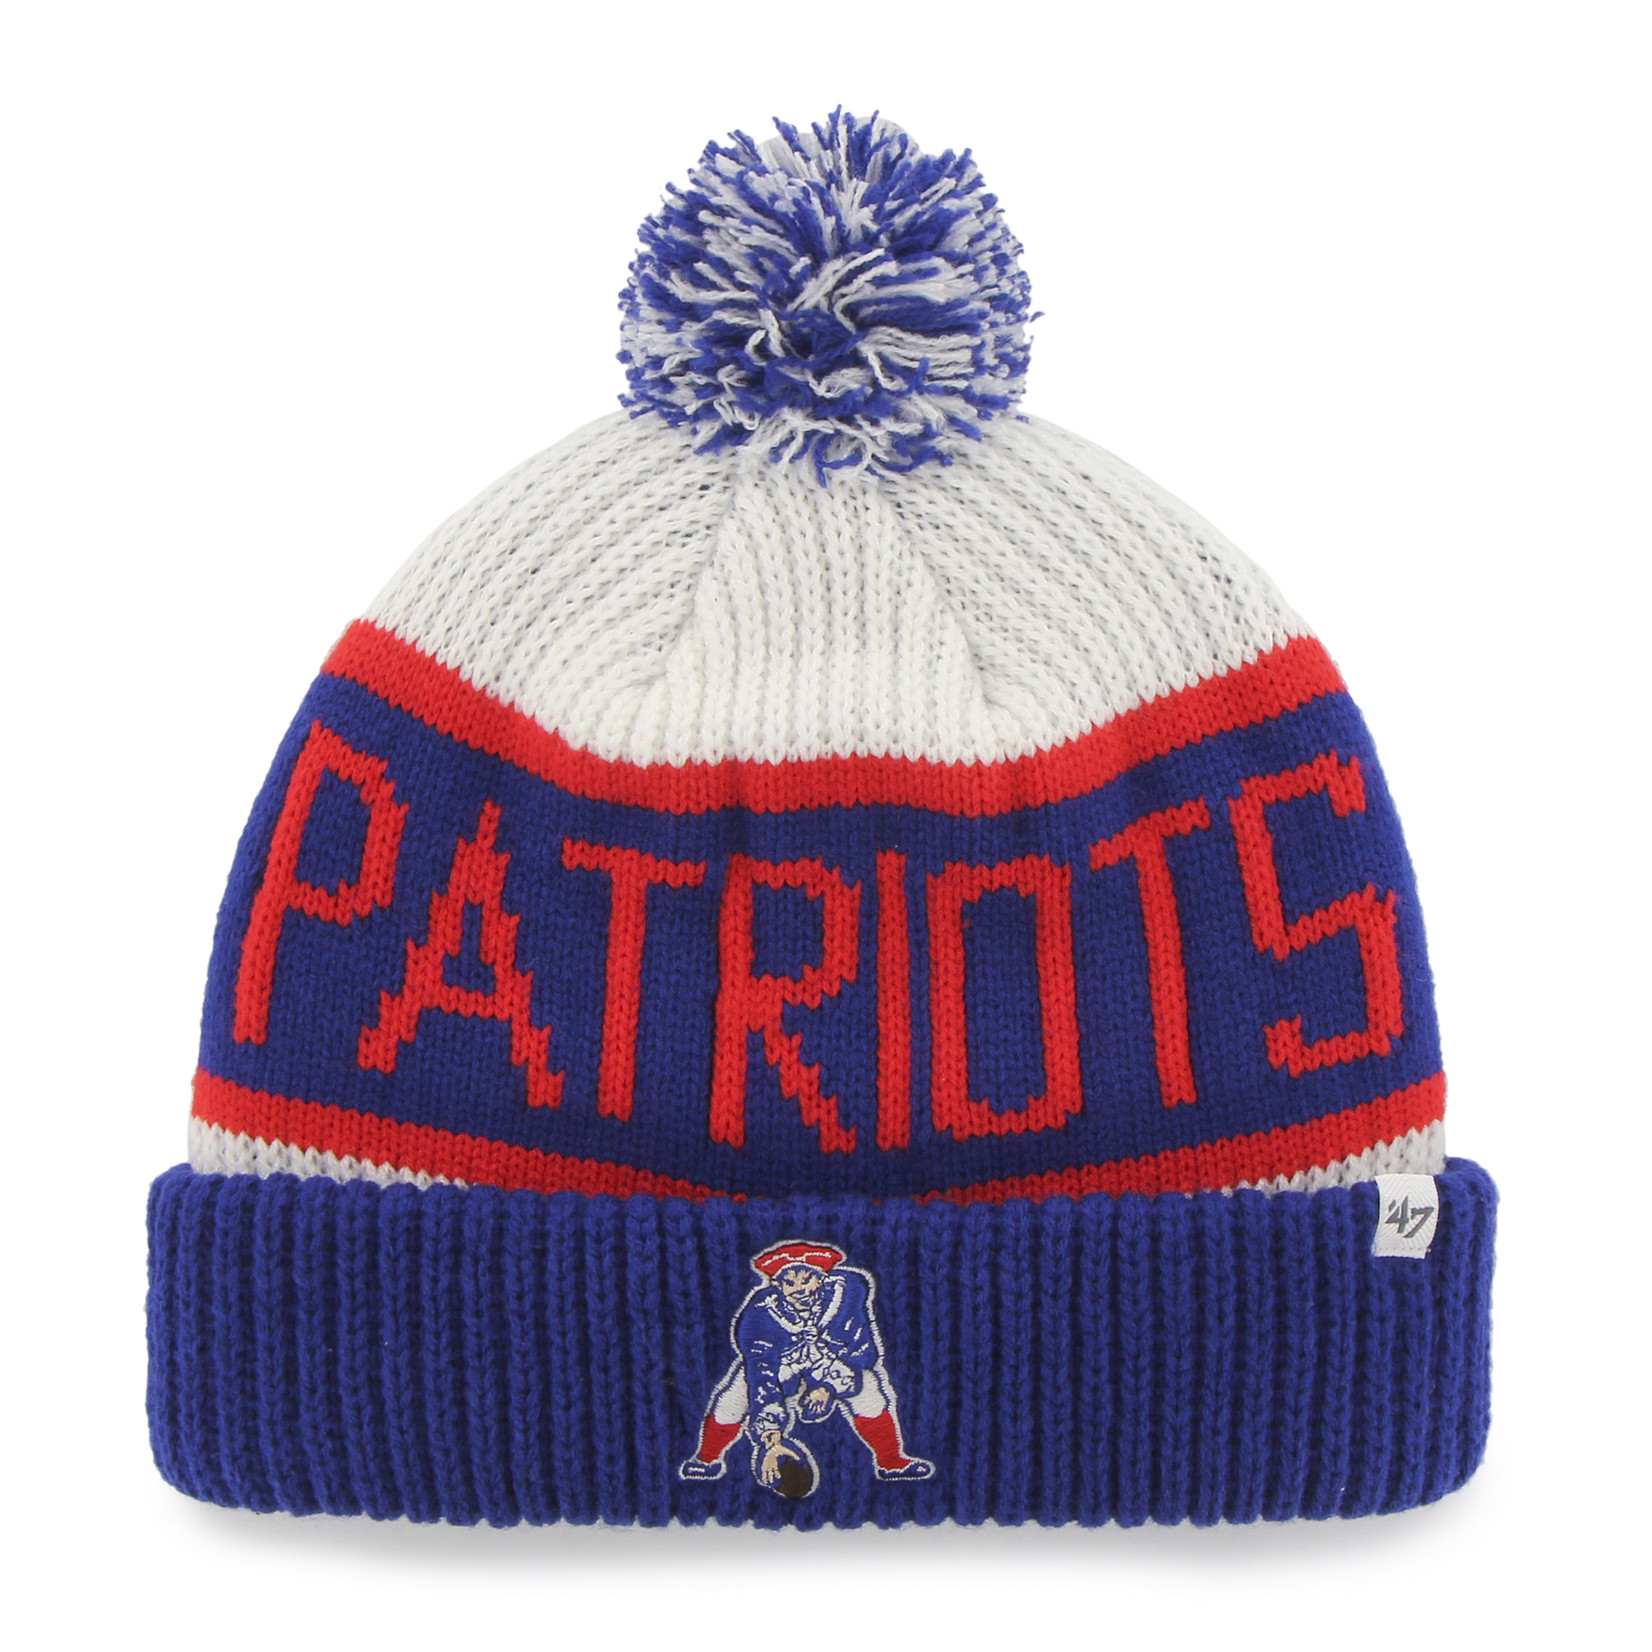 '47 Brand New England Patriots Knit Hat - Throwback White